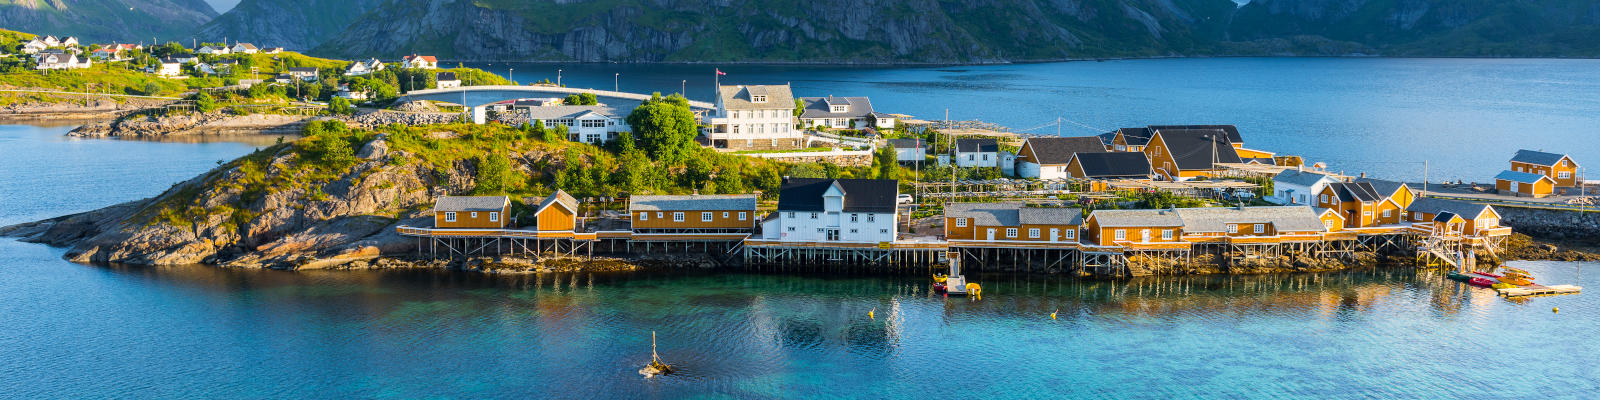 Seaside town in Norway with colourful houses